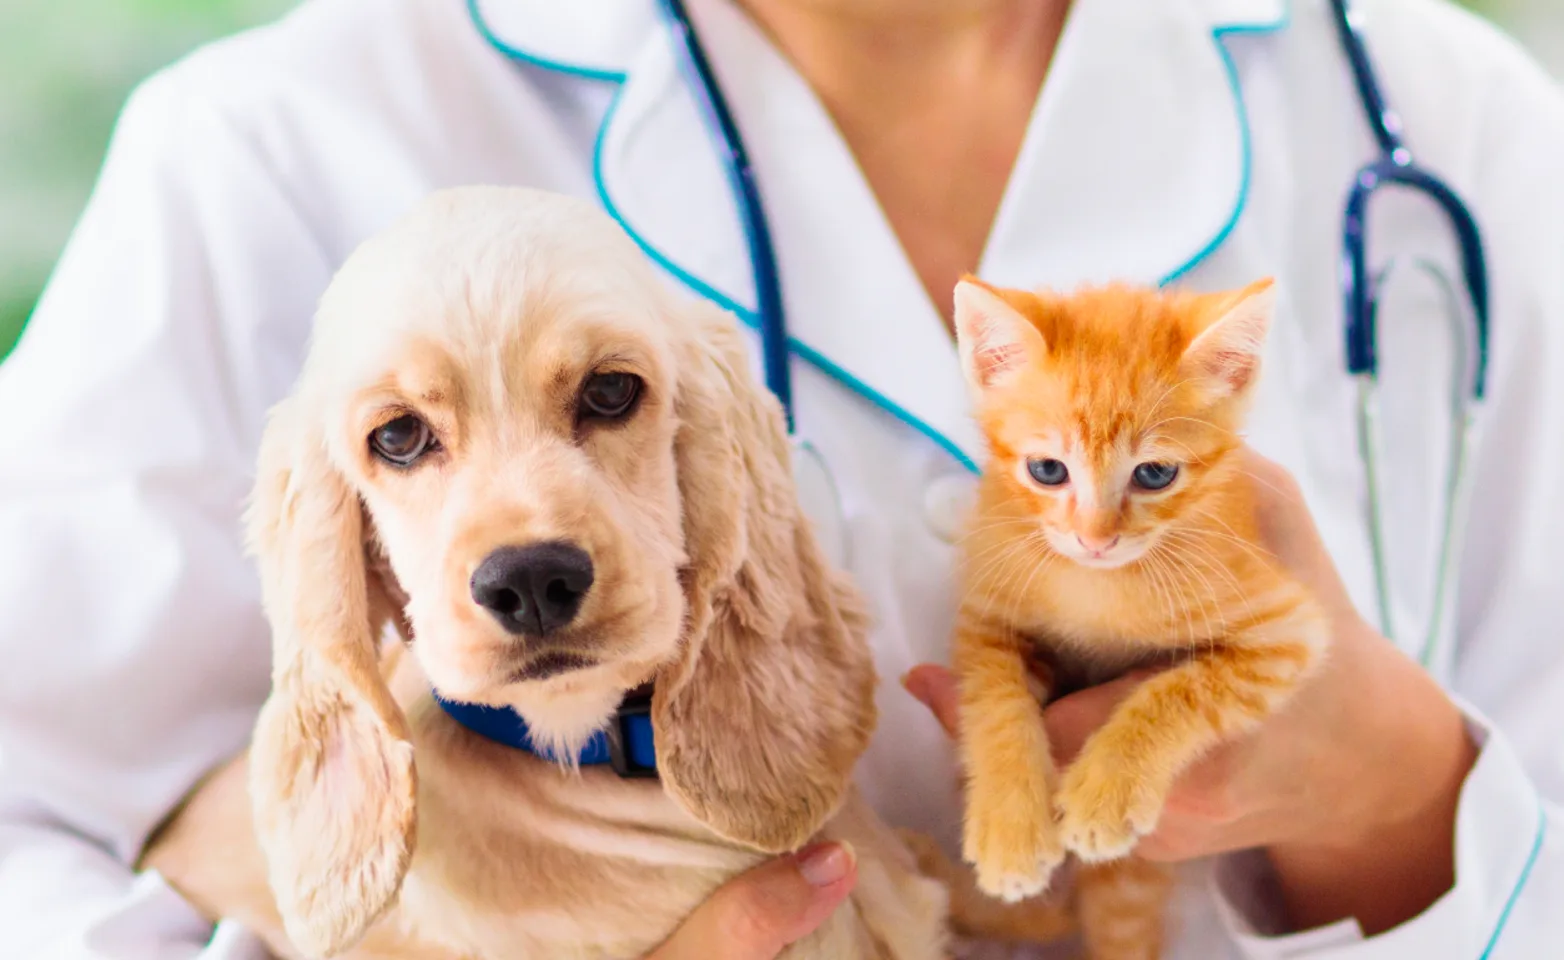 Puppy and kitten being held by doctor on table